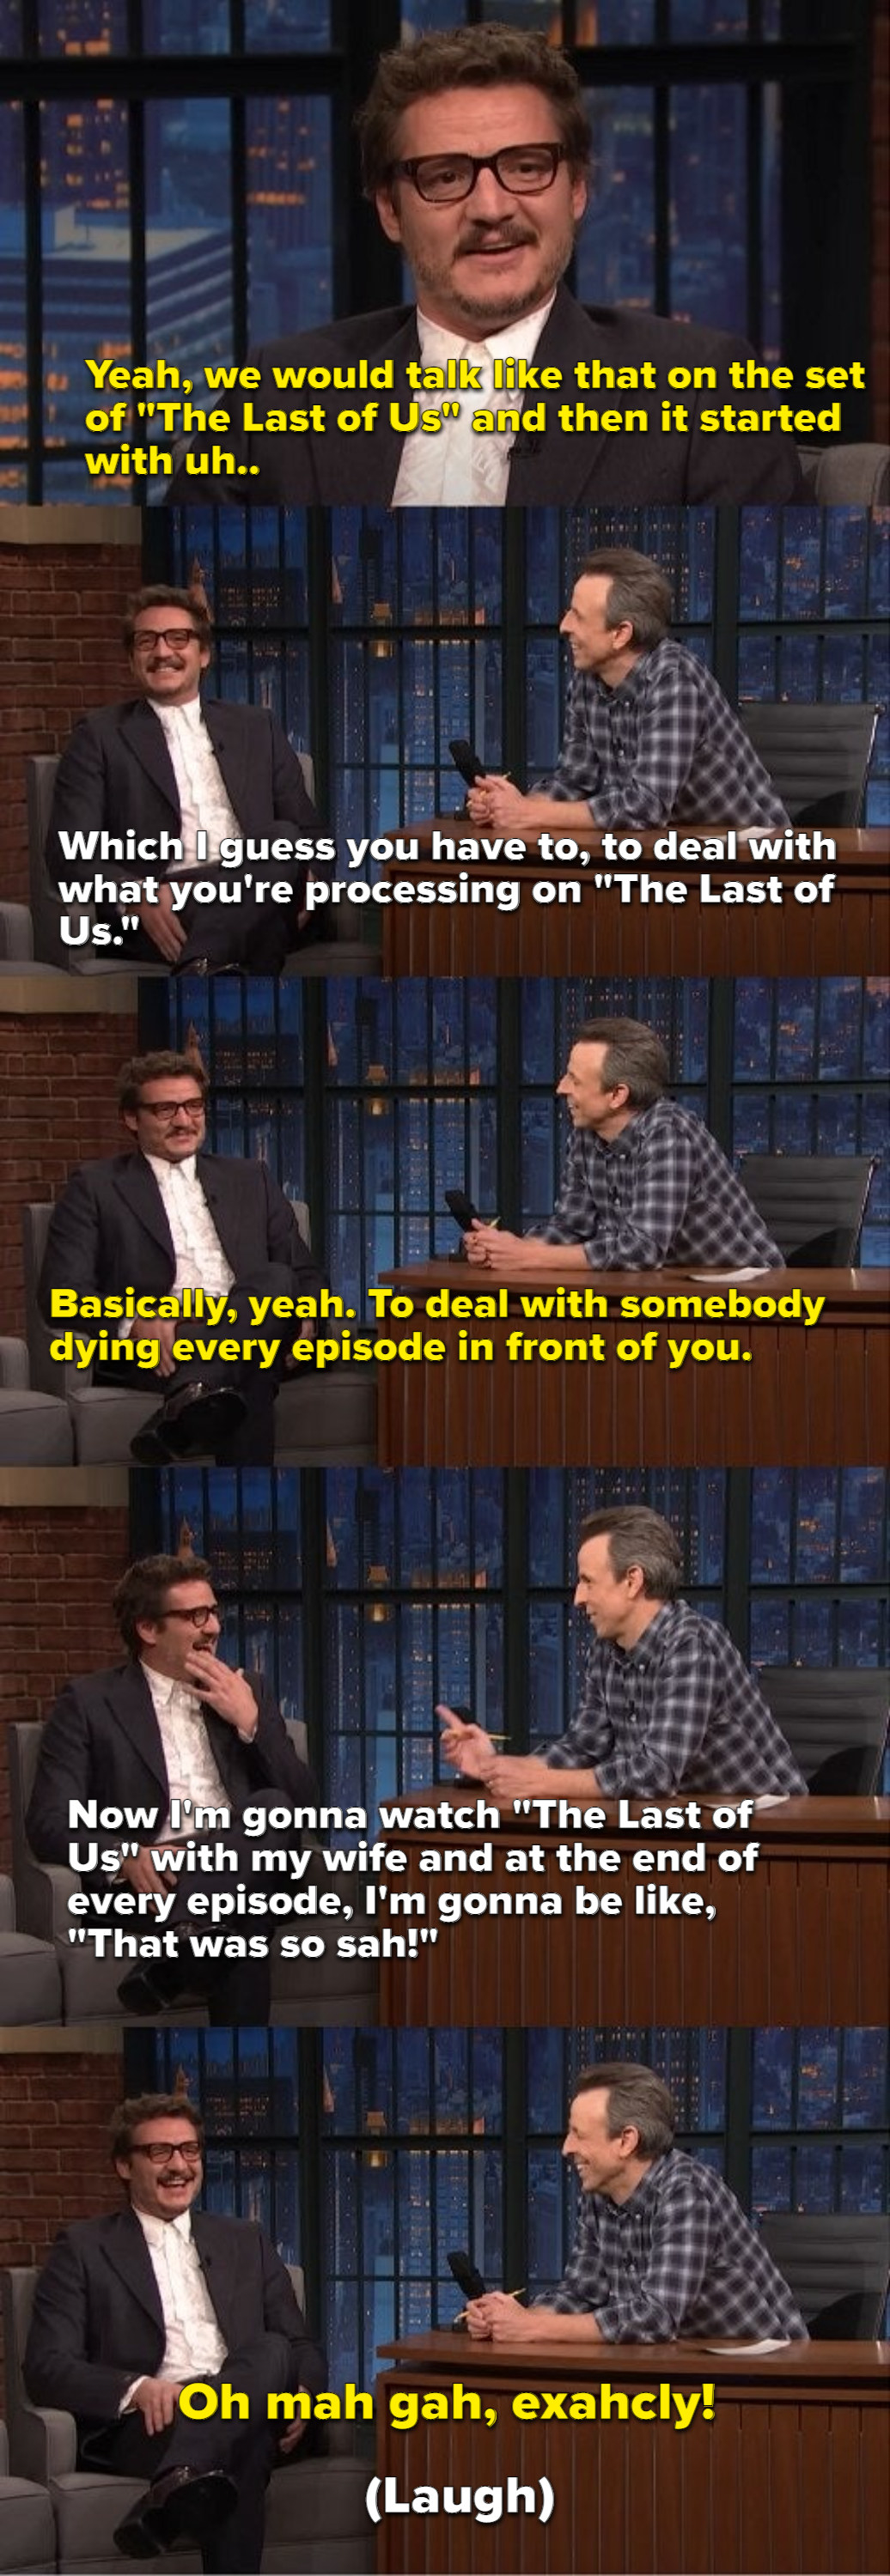 Pedro Pascal and Seth Myers talking about his SNL voice he came up with